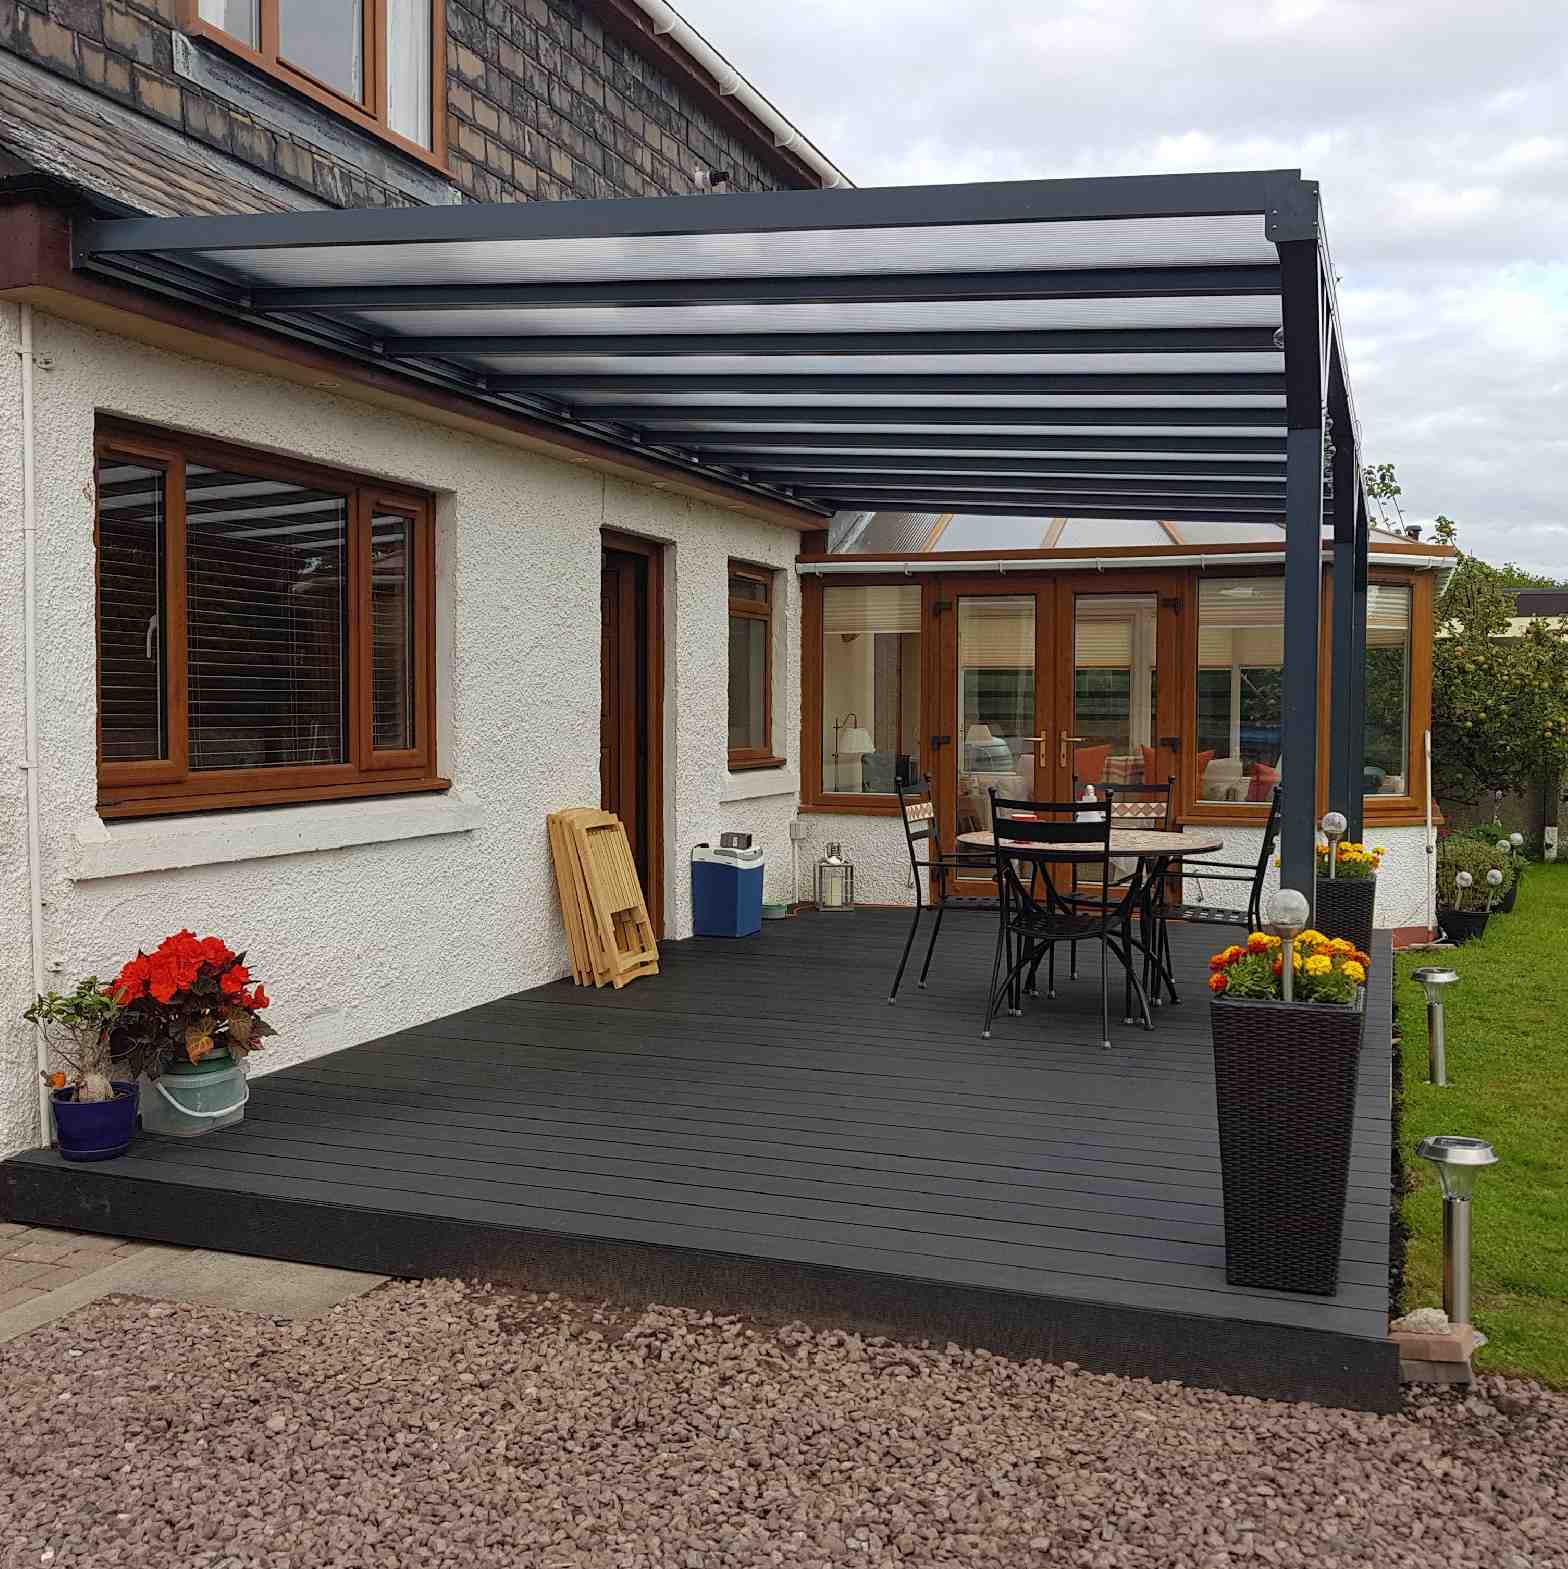 Buy Omega Verandah, Anthracite Grey, 16mm Polycarbonate Glazing - 4.8m (W) x 4.5m (P), (3) Supporting Posts online today